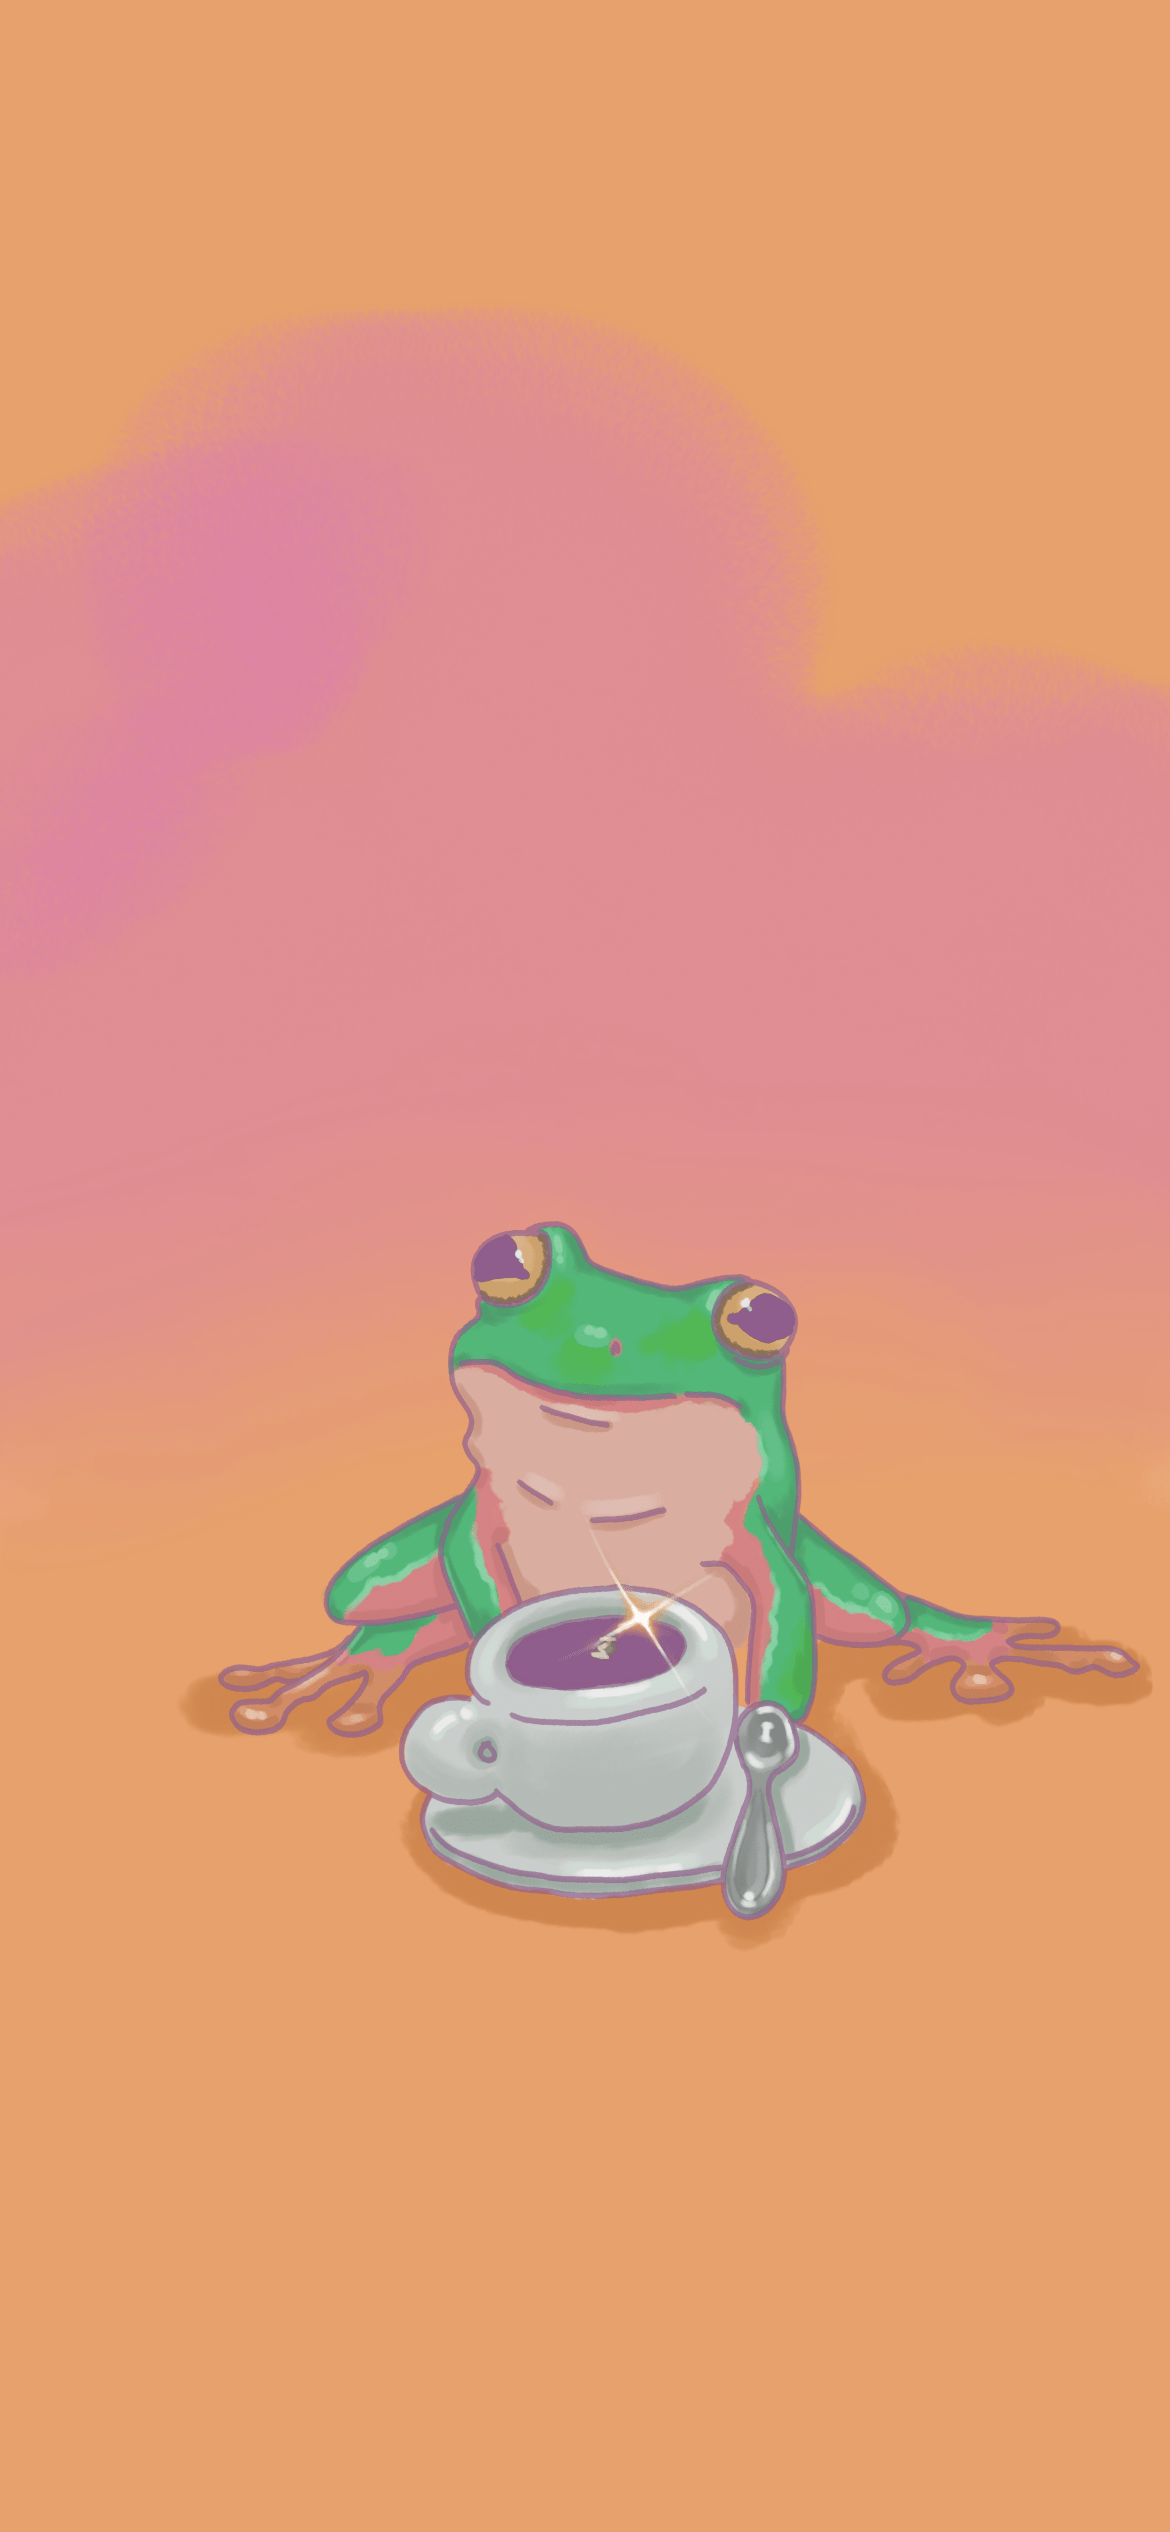 I hope this post is ok. I make frog themed wallpaper in Wallpaper Engine and I wanted to share this with you :) My name is Kierinkiivi in Steam. Here is some